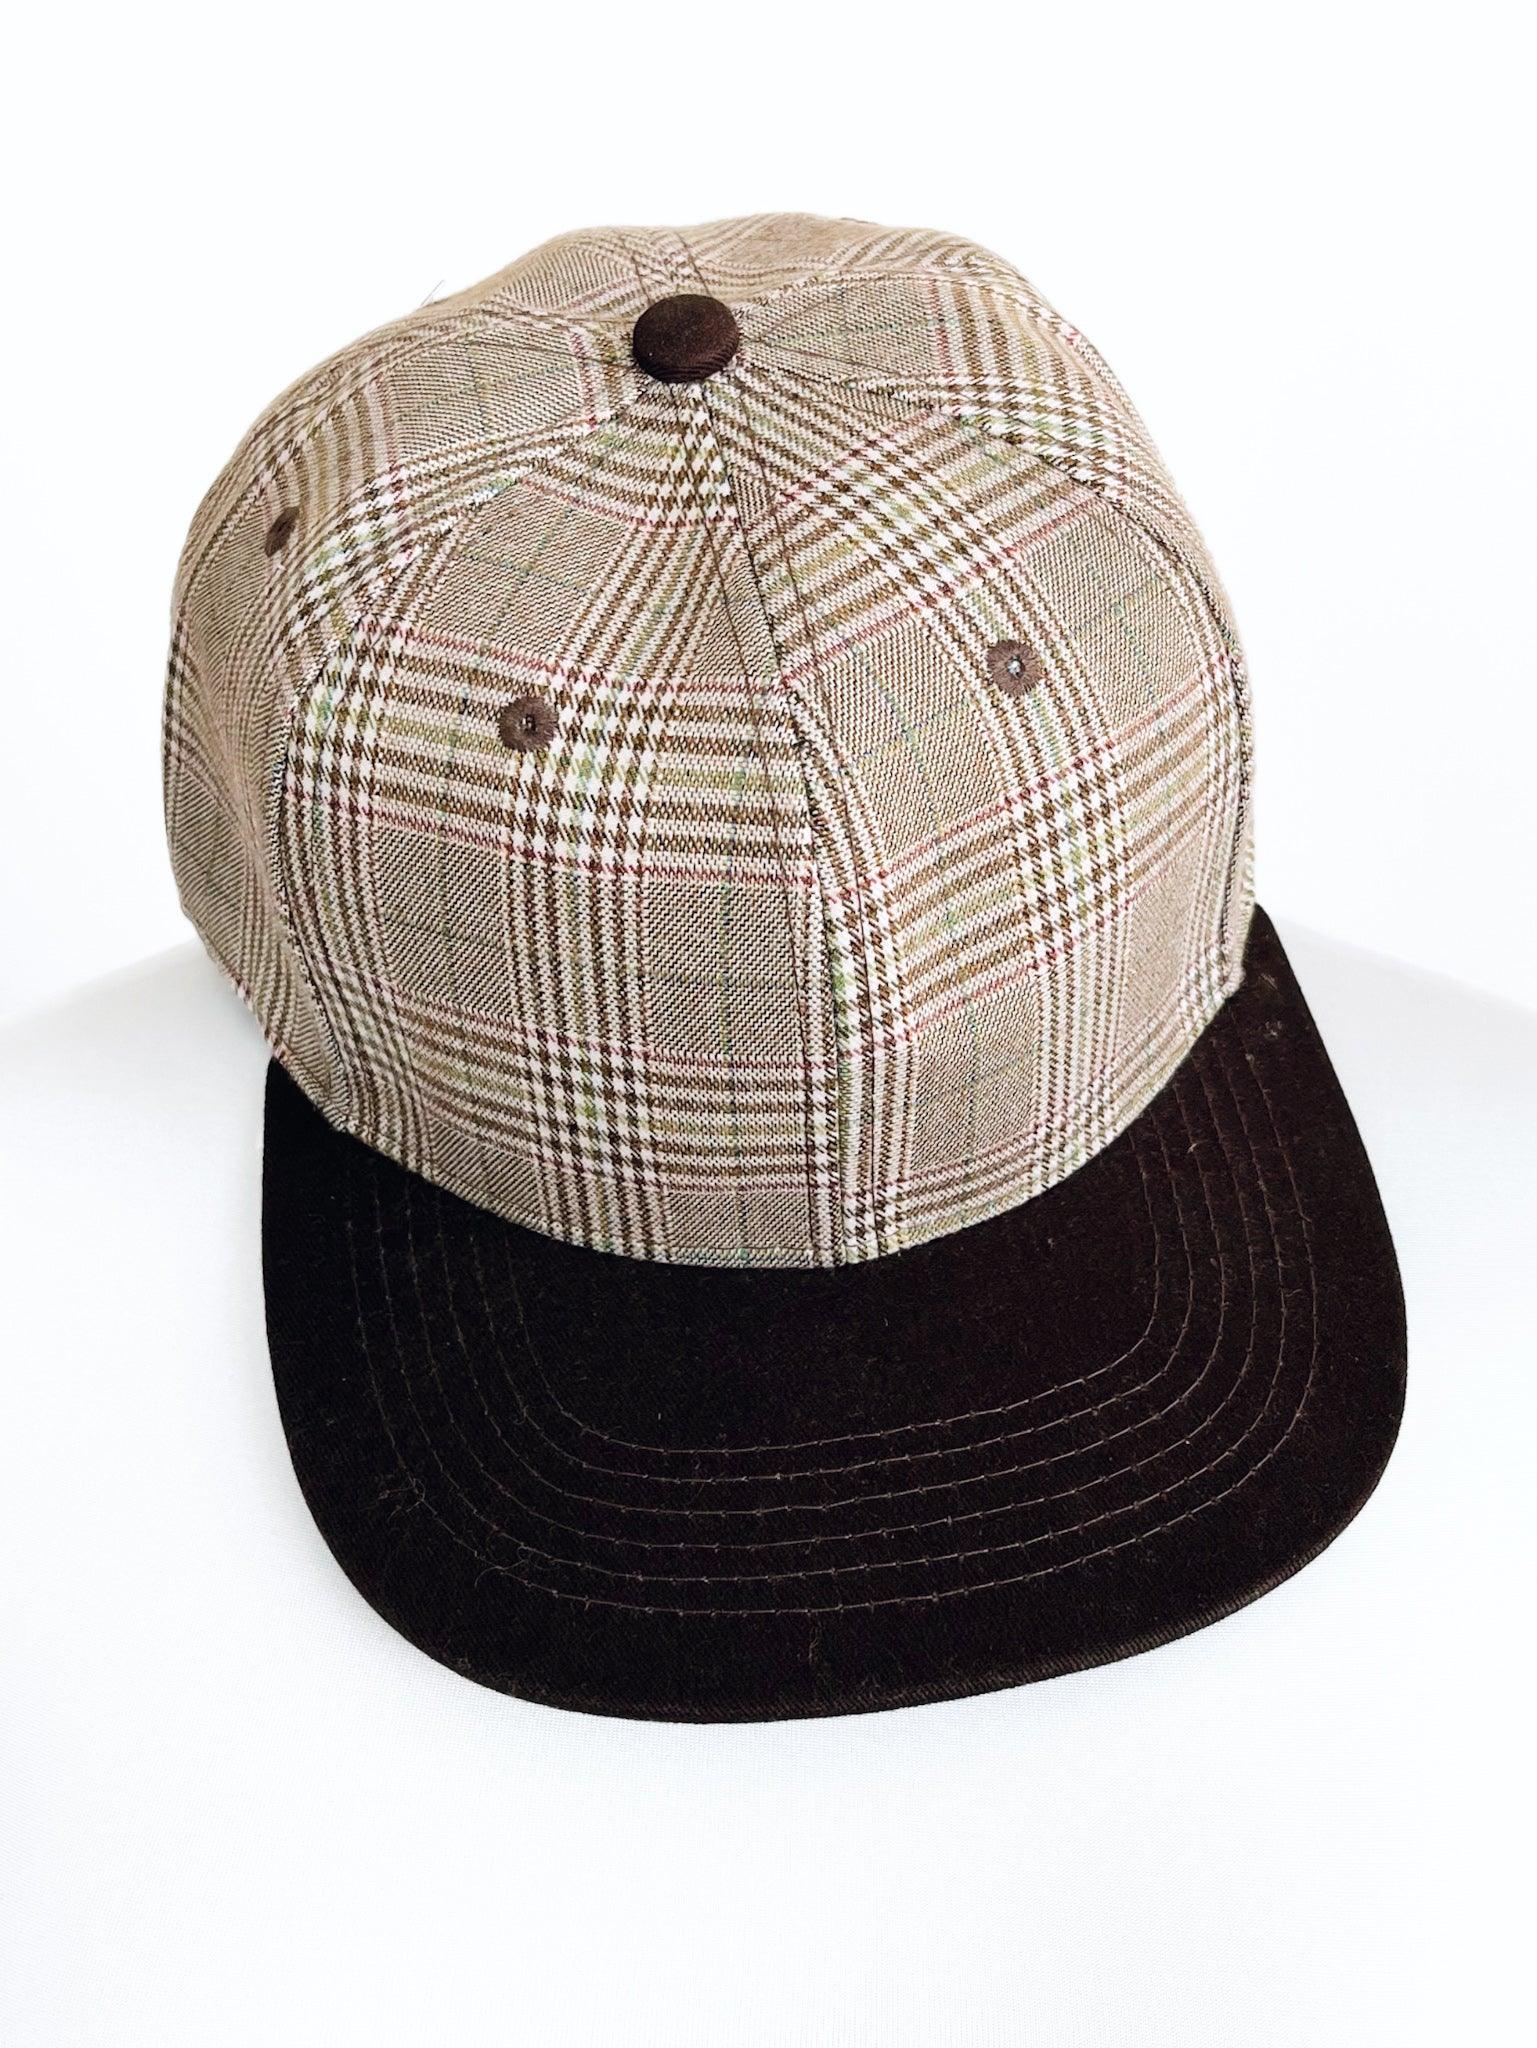 Wales Plaid Tartan Cap Hat - Beige-260 Other Accessories-Cap Zone-Coastal Bloom Boutique, find the trendiest versions of the popular styles and looks Located in Indialantic, FL